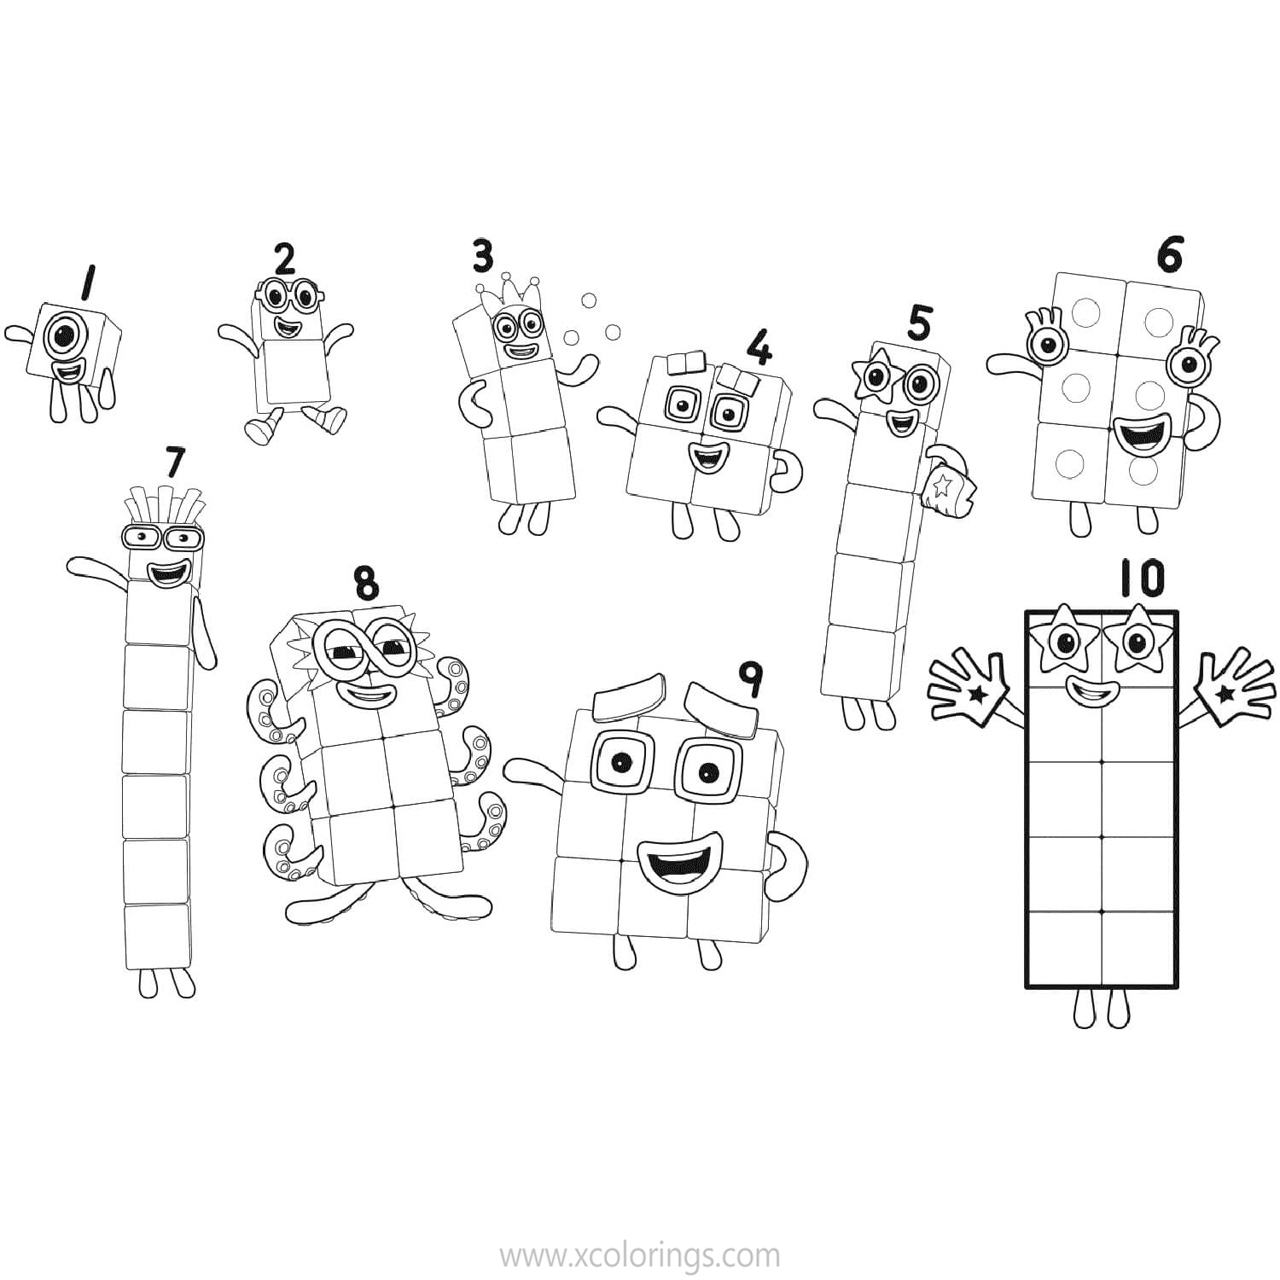 Free Numberblocks Coloring Pages 1 to 10 printable